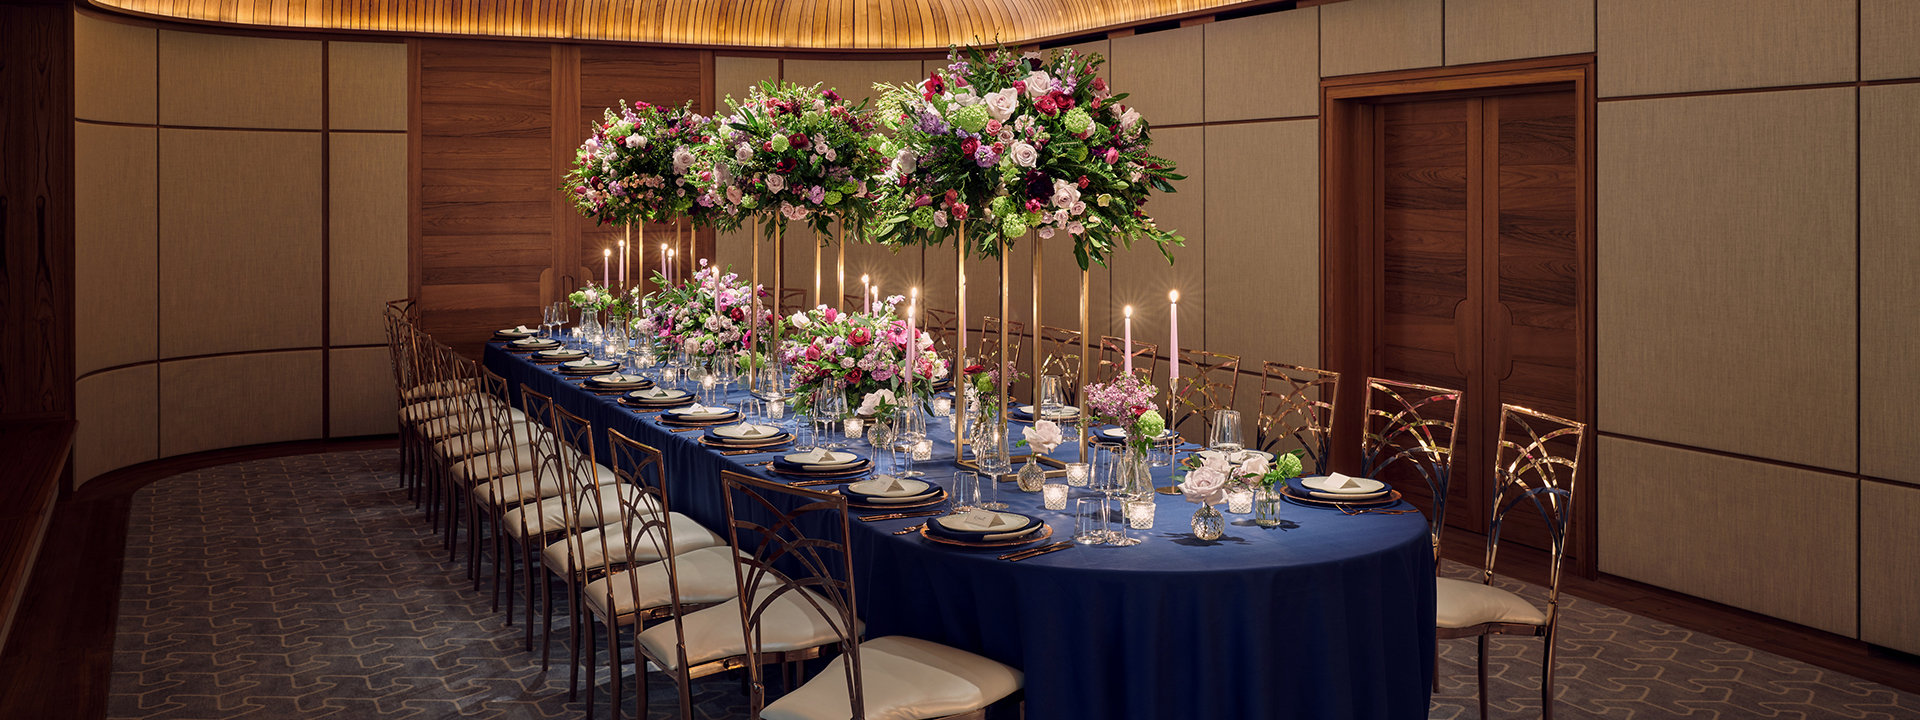 A richly decorated table with flowers and candles, on a blue tablecloth with golden chairs in The Wilton Room.